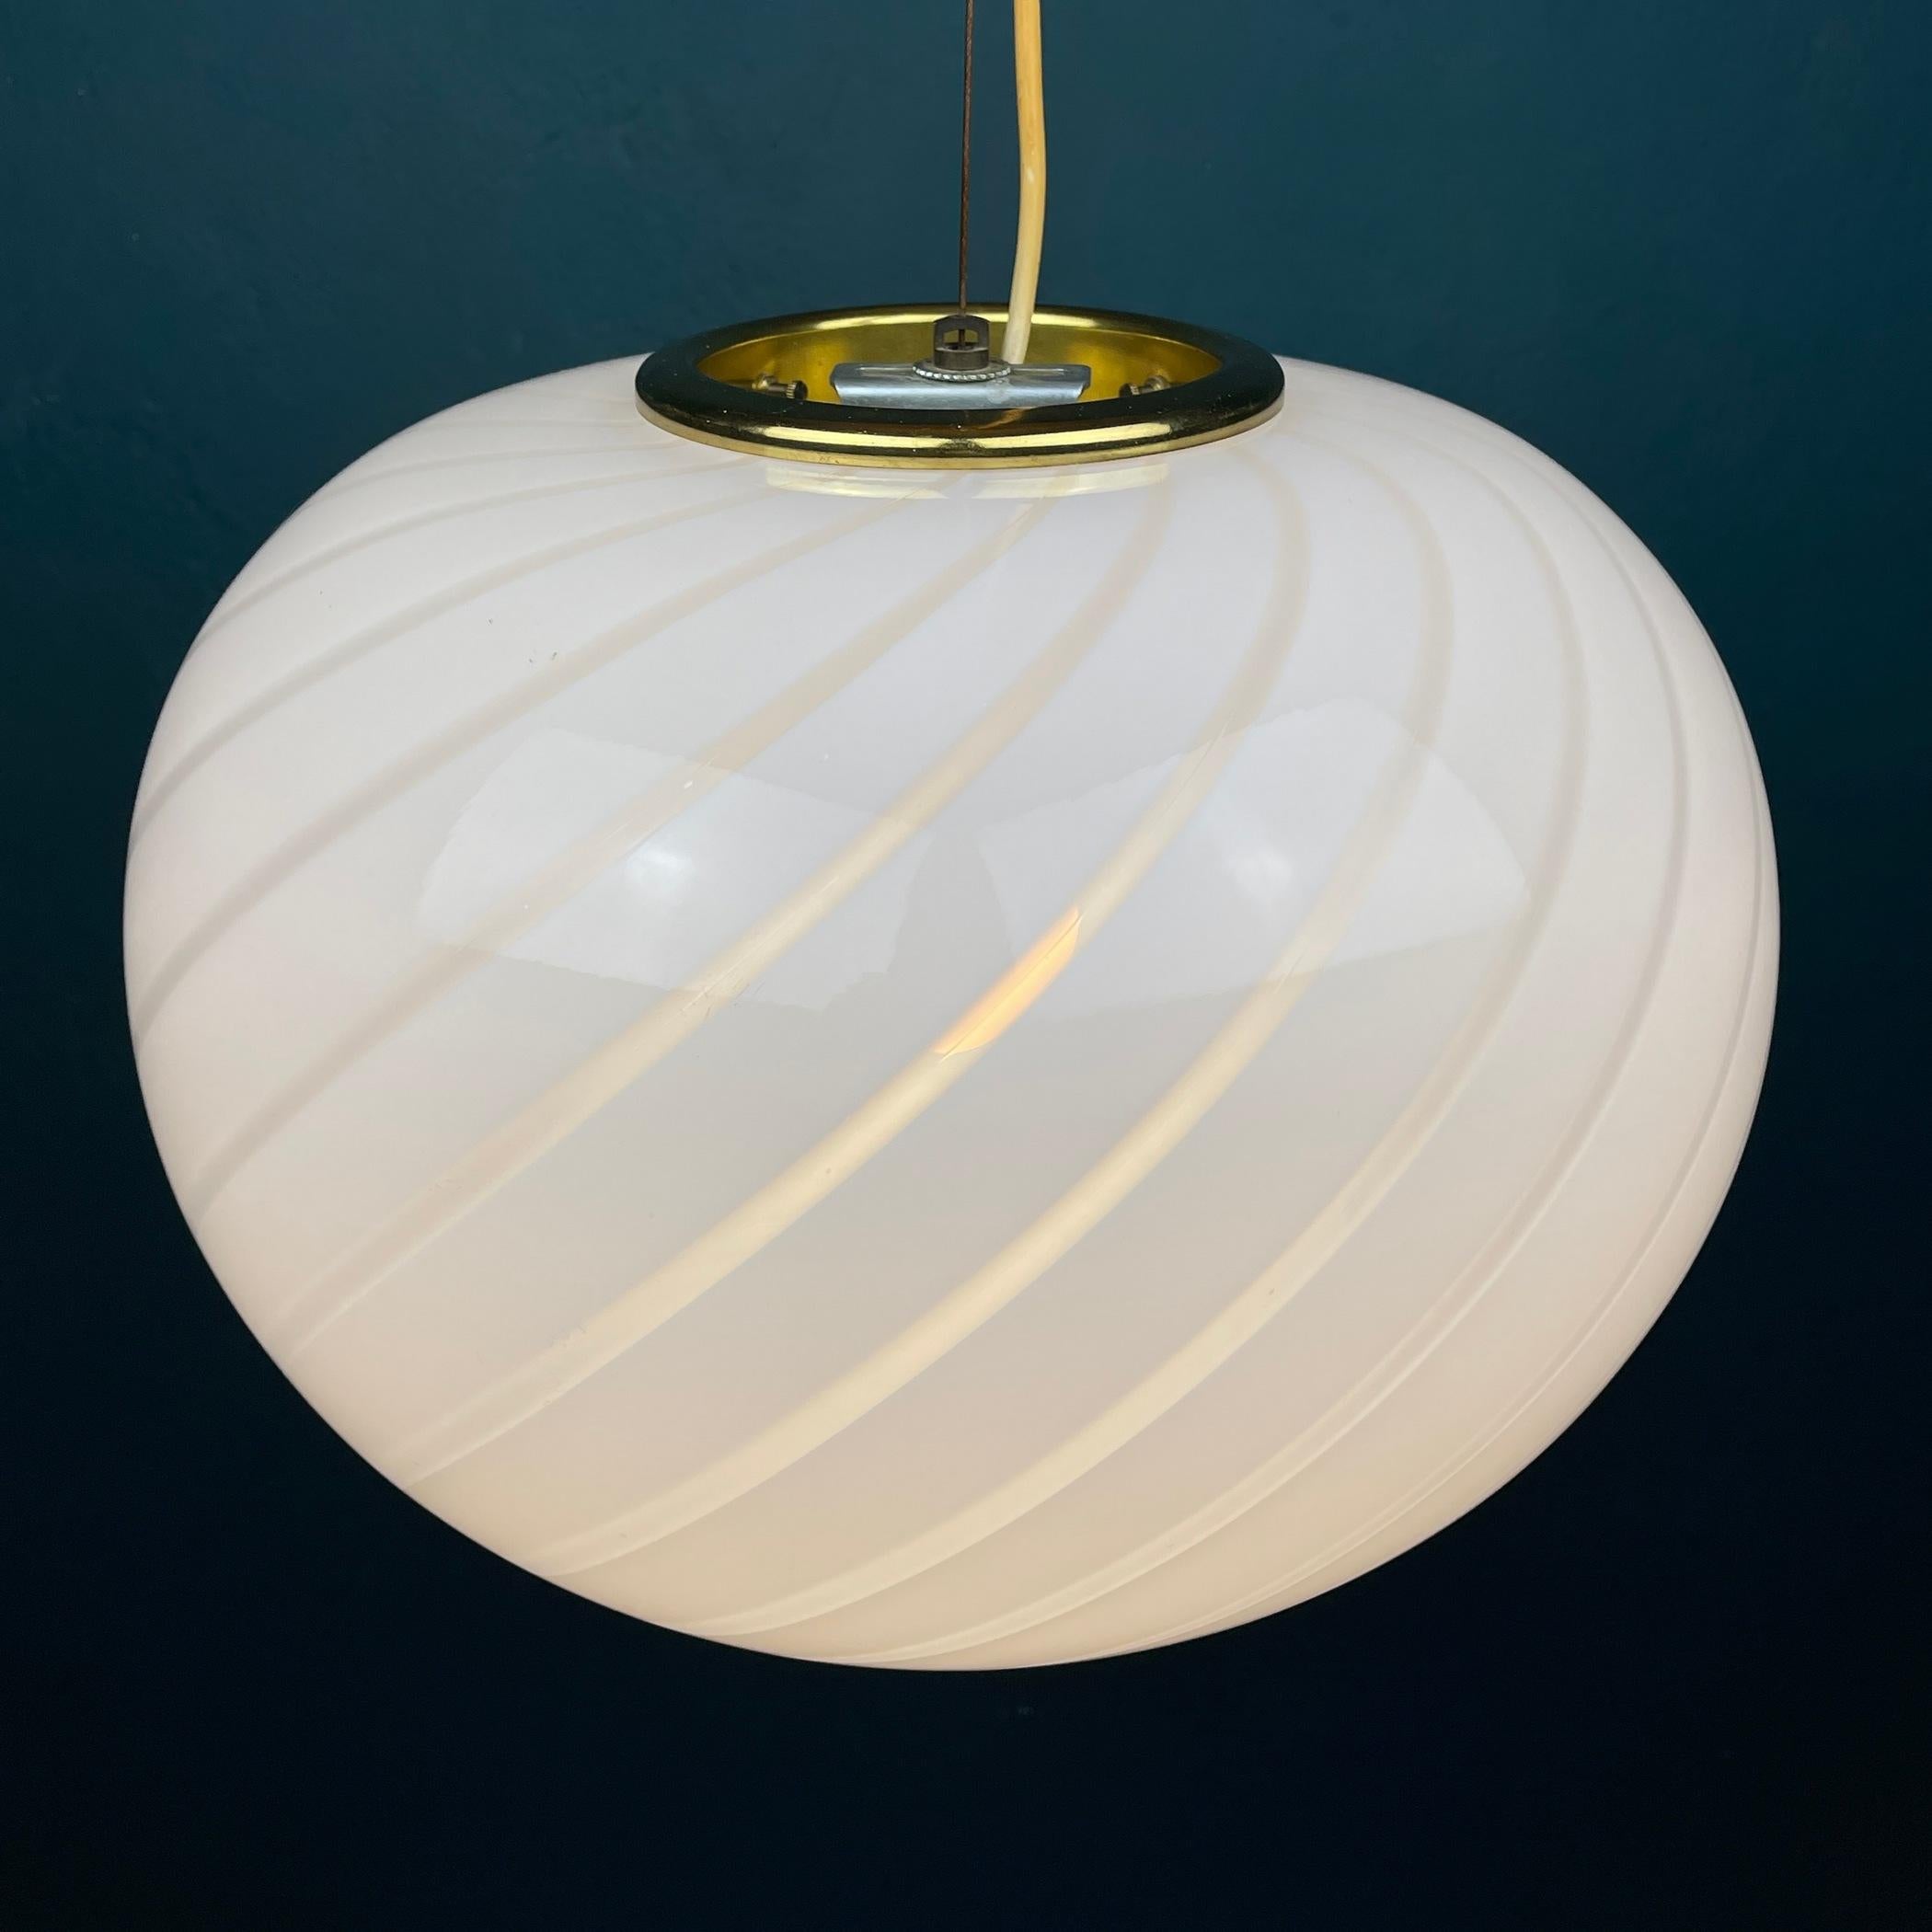 This swirl vintage lamp was made in Italy in the 70s. Very beautiful white Murano glass with bends in the form of a sphere. Perfect vintage condition. No chips or cracks. Requires a standard Edison E27 with a screw lamp. Chandelier height with cable